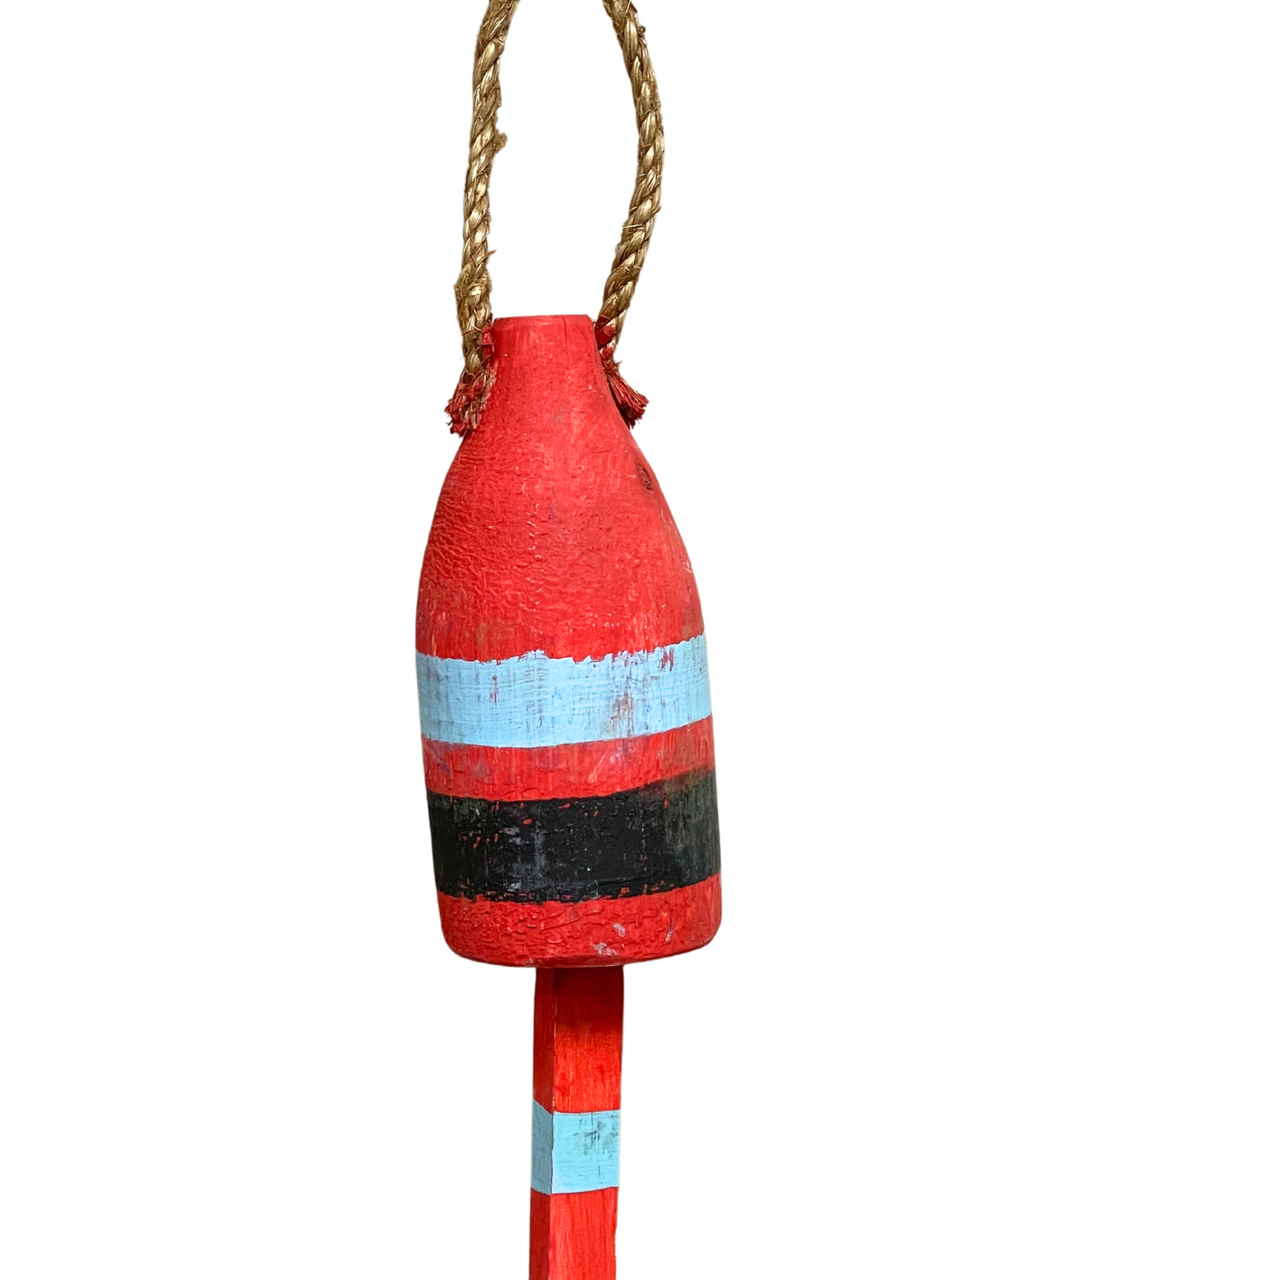 Red Navy and Light Blue Hand Painted Wooden Fishing Buoy with Jute